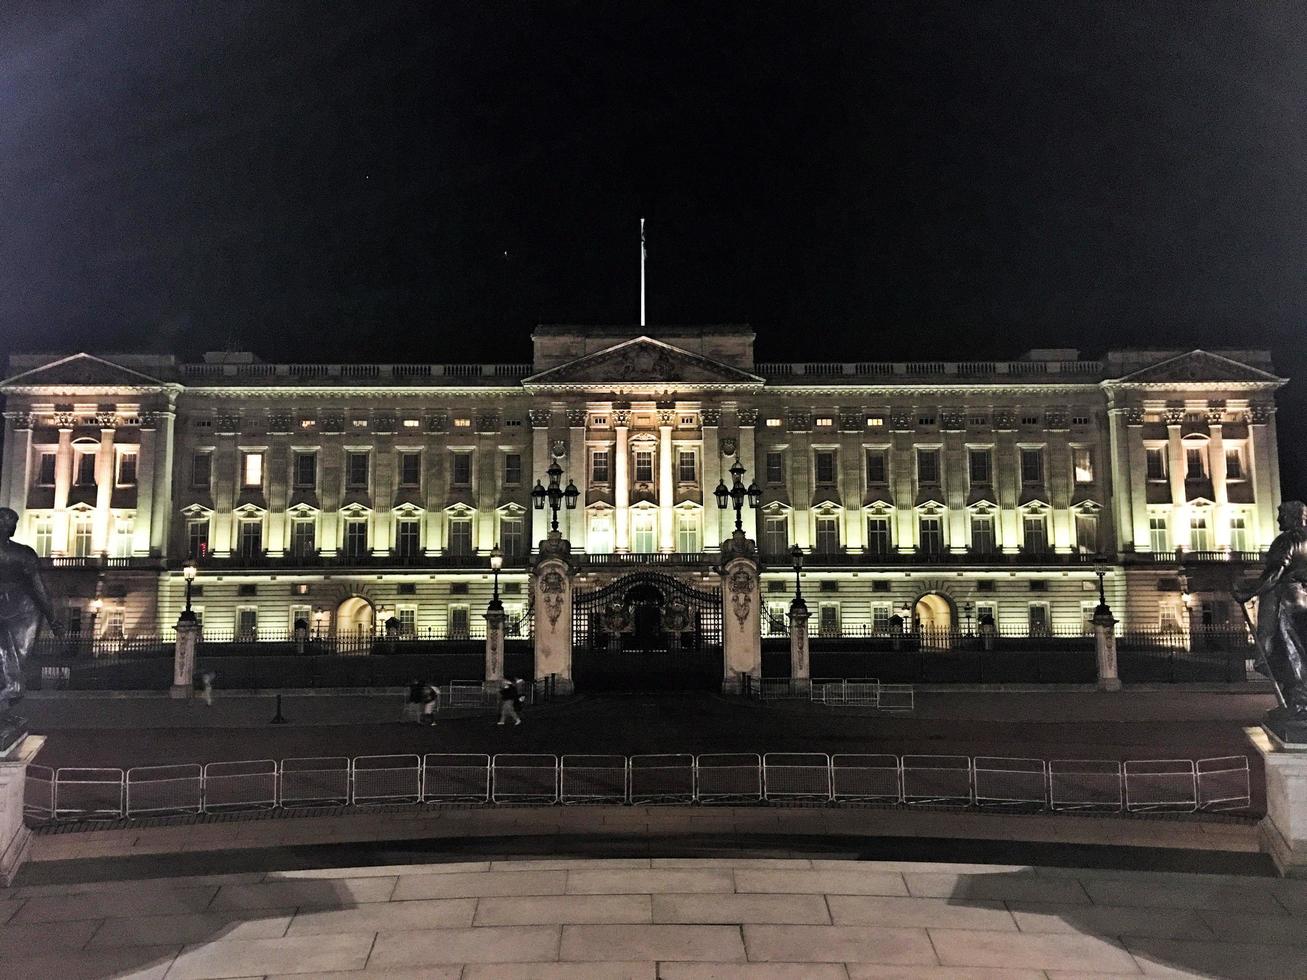 London in the UK in March 2018. A view of Buckingham Palace at night photo